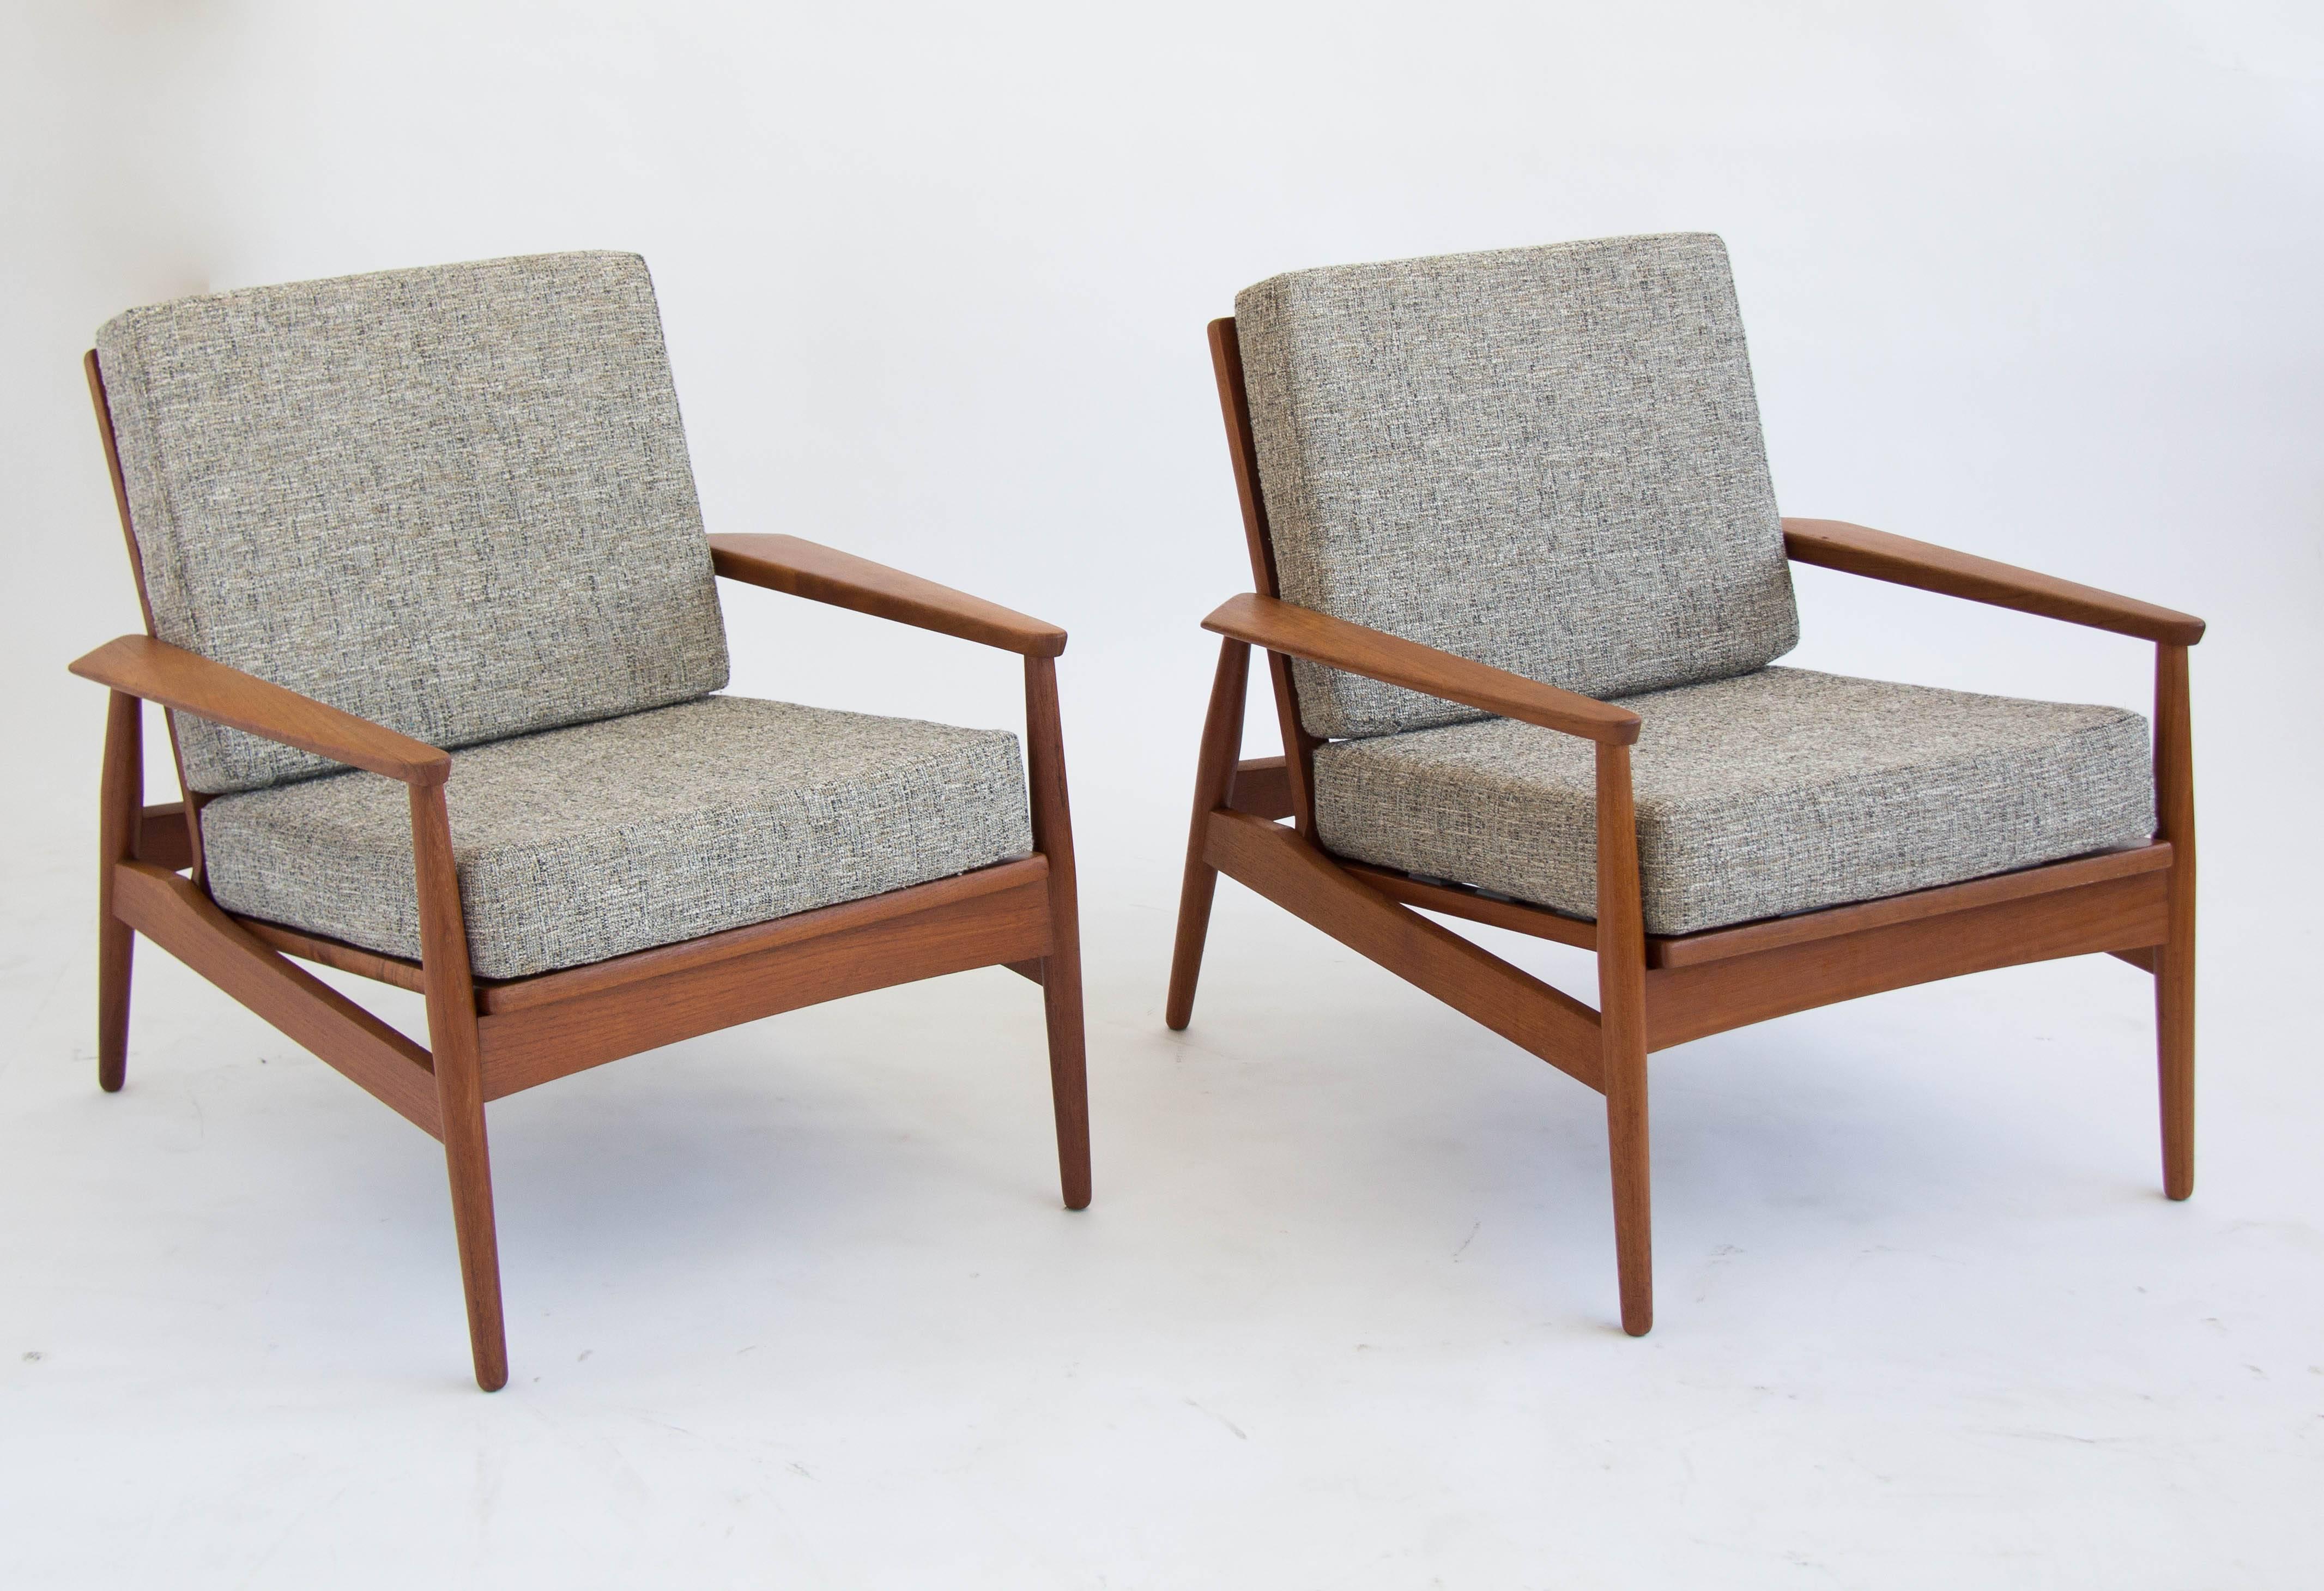 Matched pair of teak Danish modern lounge chairs with sculpted armrests.  The foam backrest and seat cushions recline at an angle to the main frame and are upholstered in a salt-and-pepper tweed.  
The chairs are stamped 